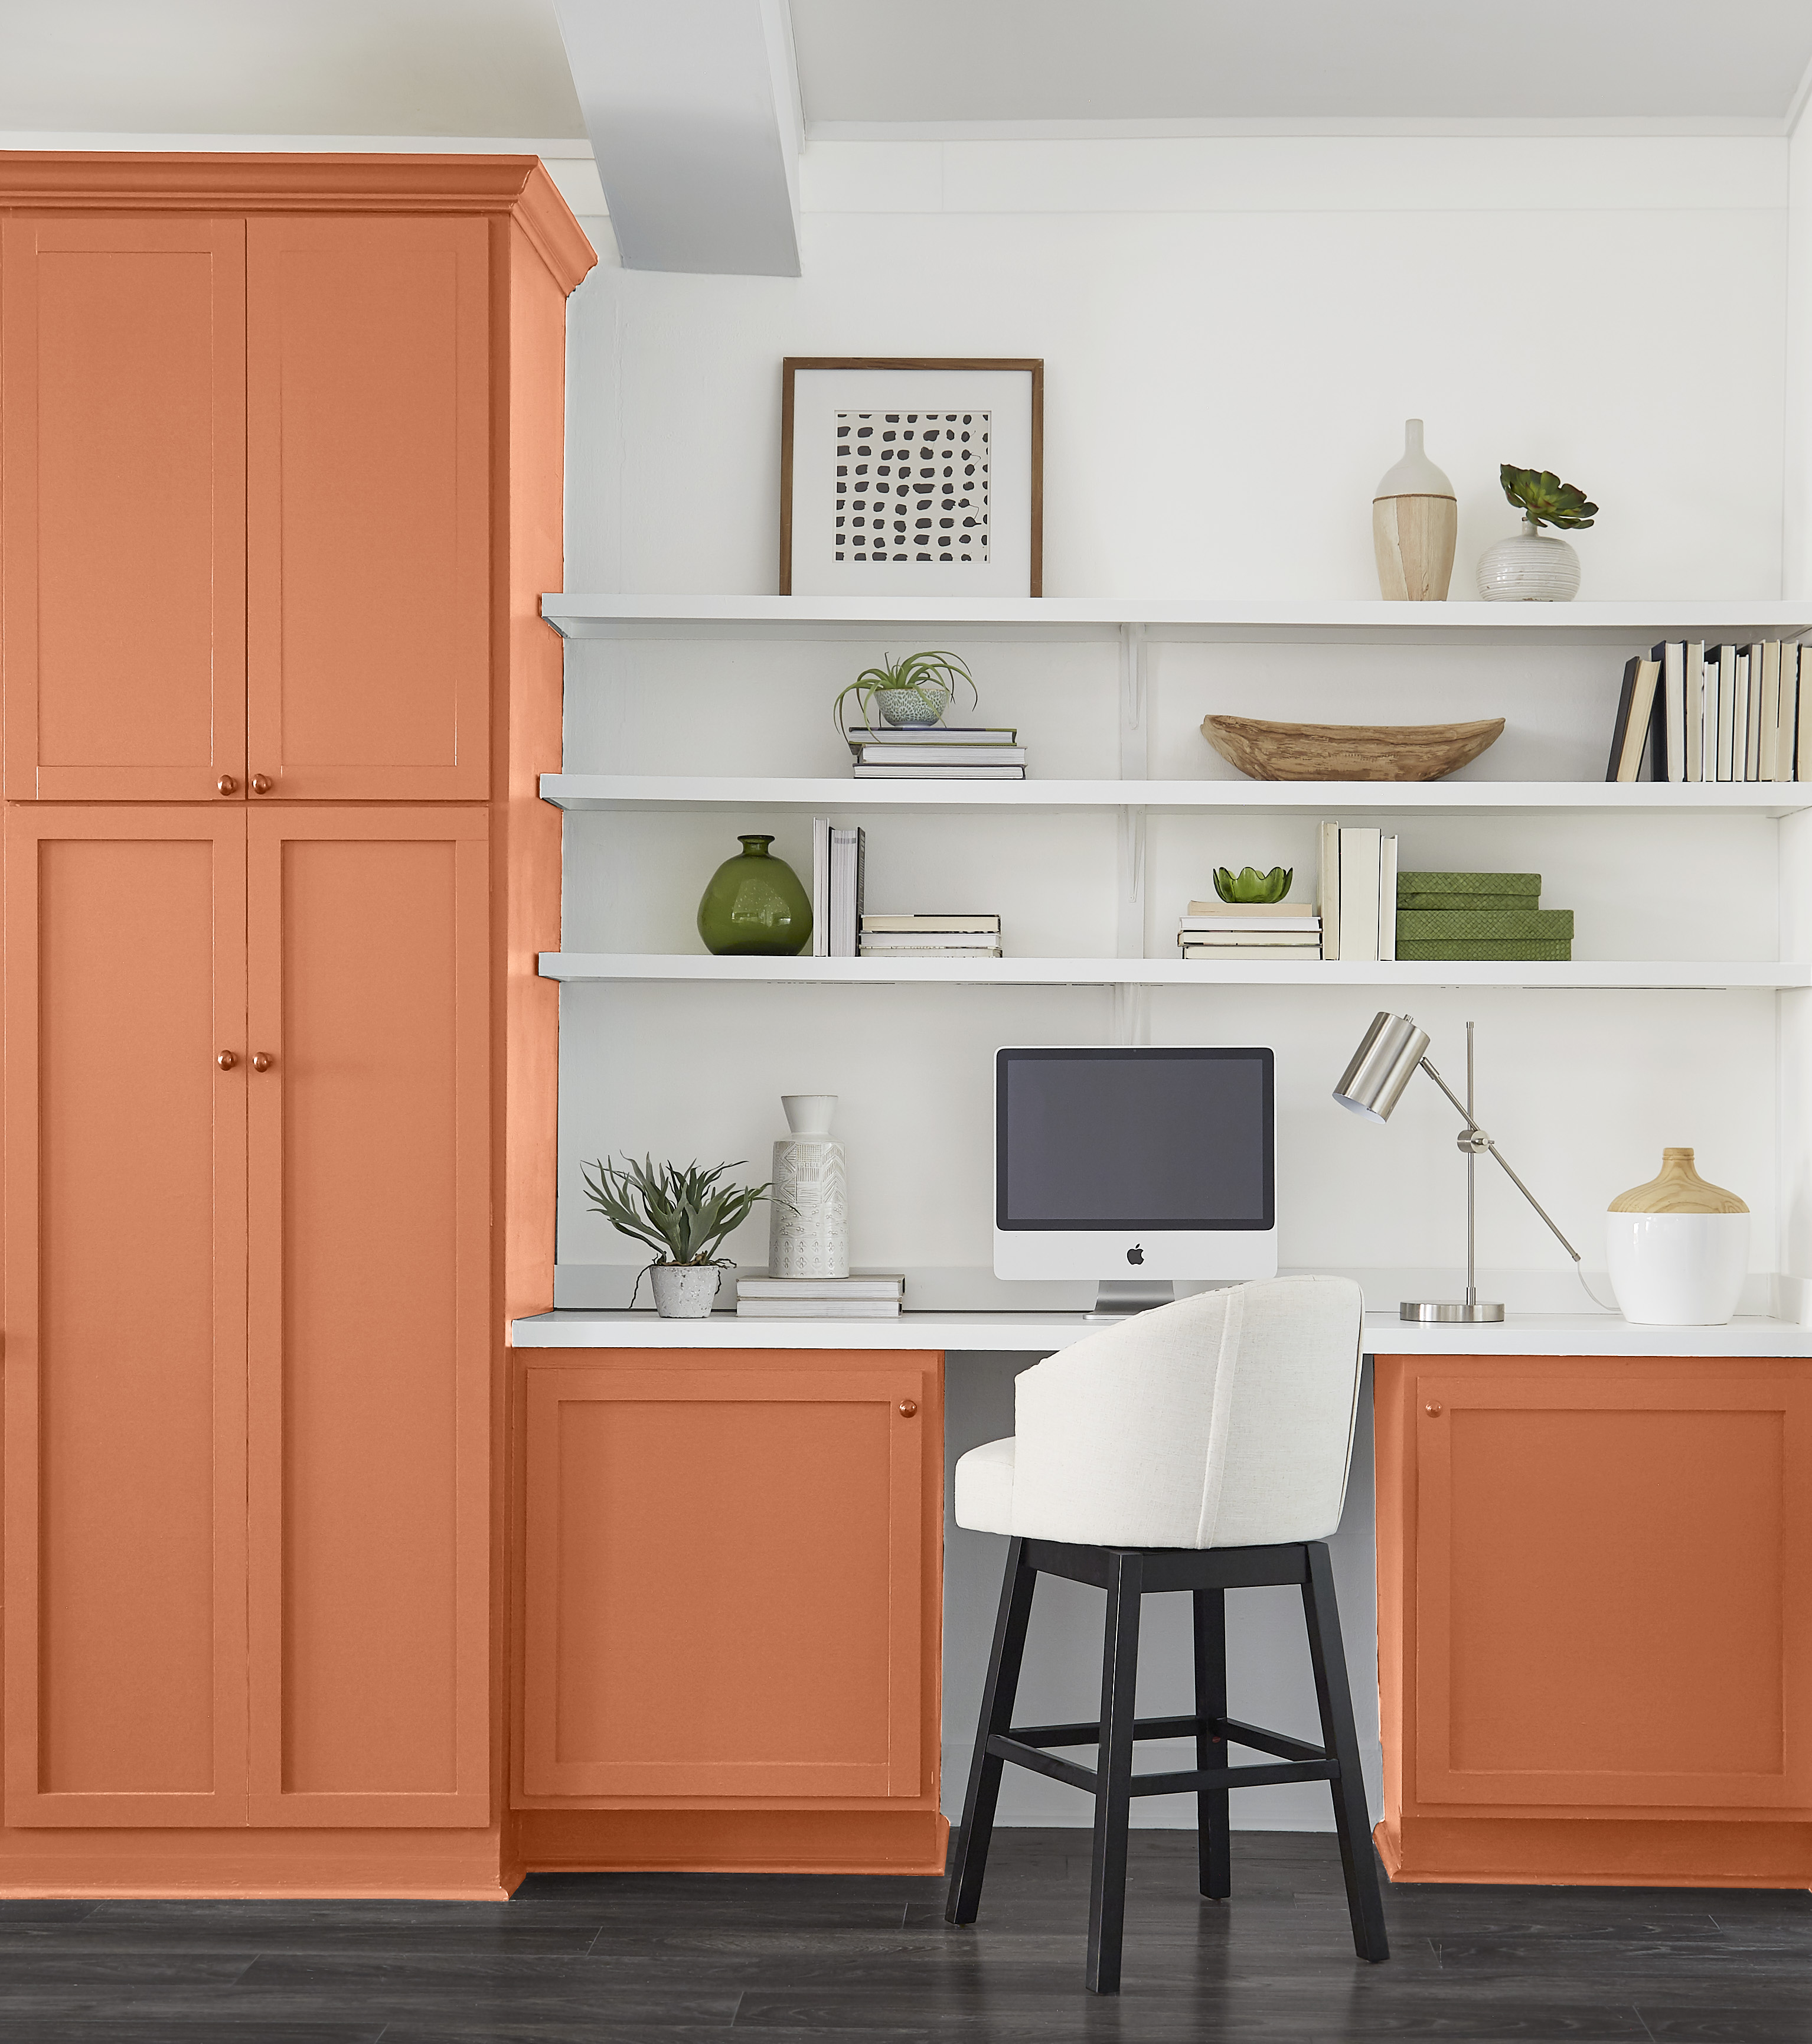 A built-in storage and desk area with cabinets painted in a dark copper-orange colour